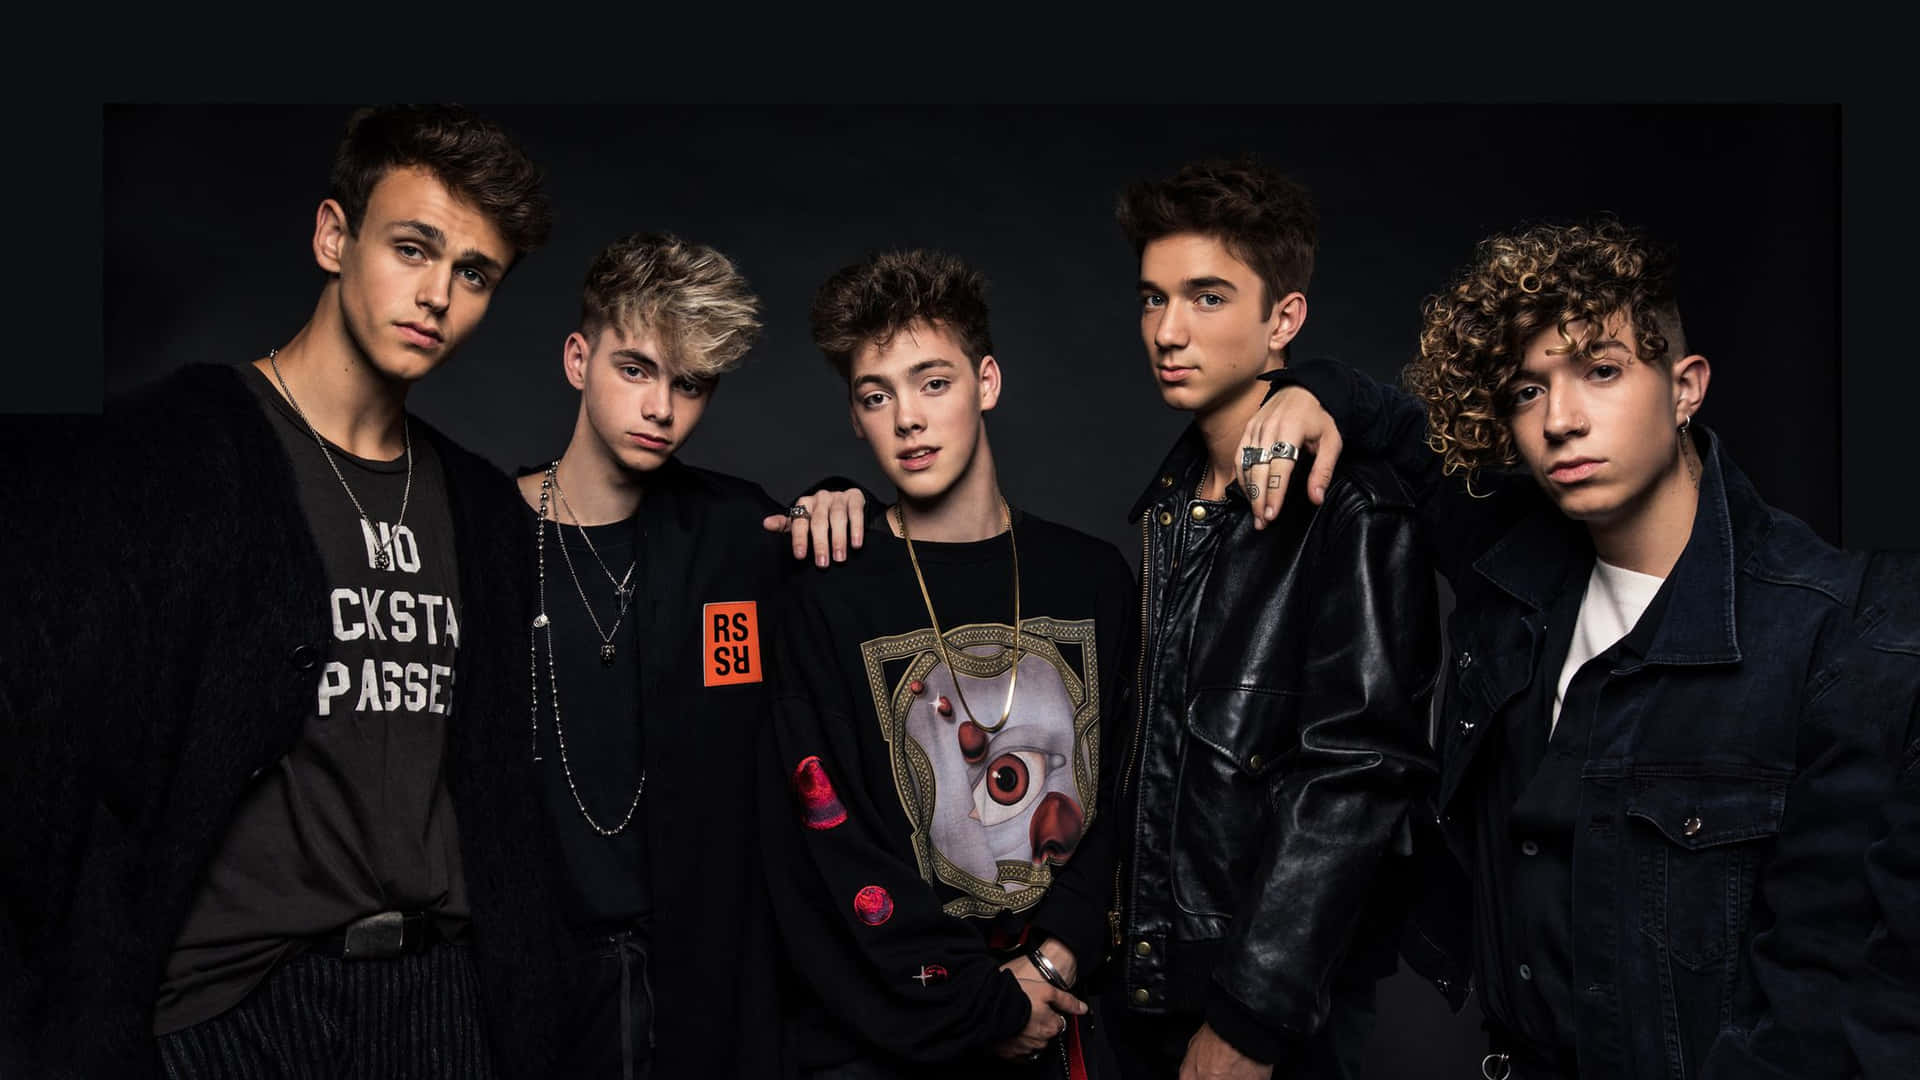 The 5 members of Why Don’t We band Wallpaper